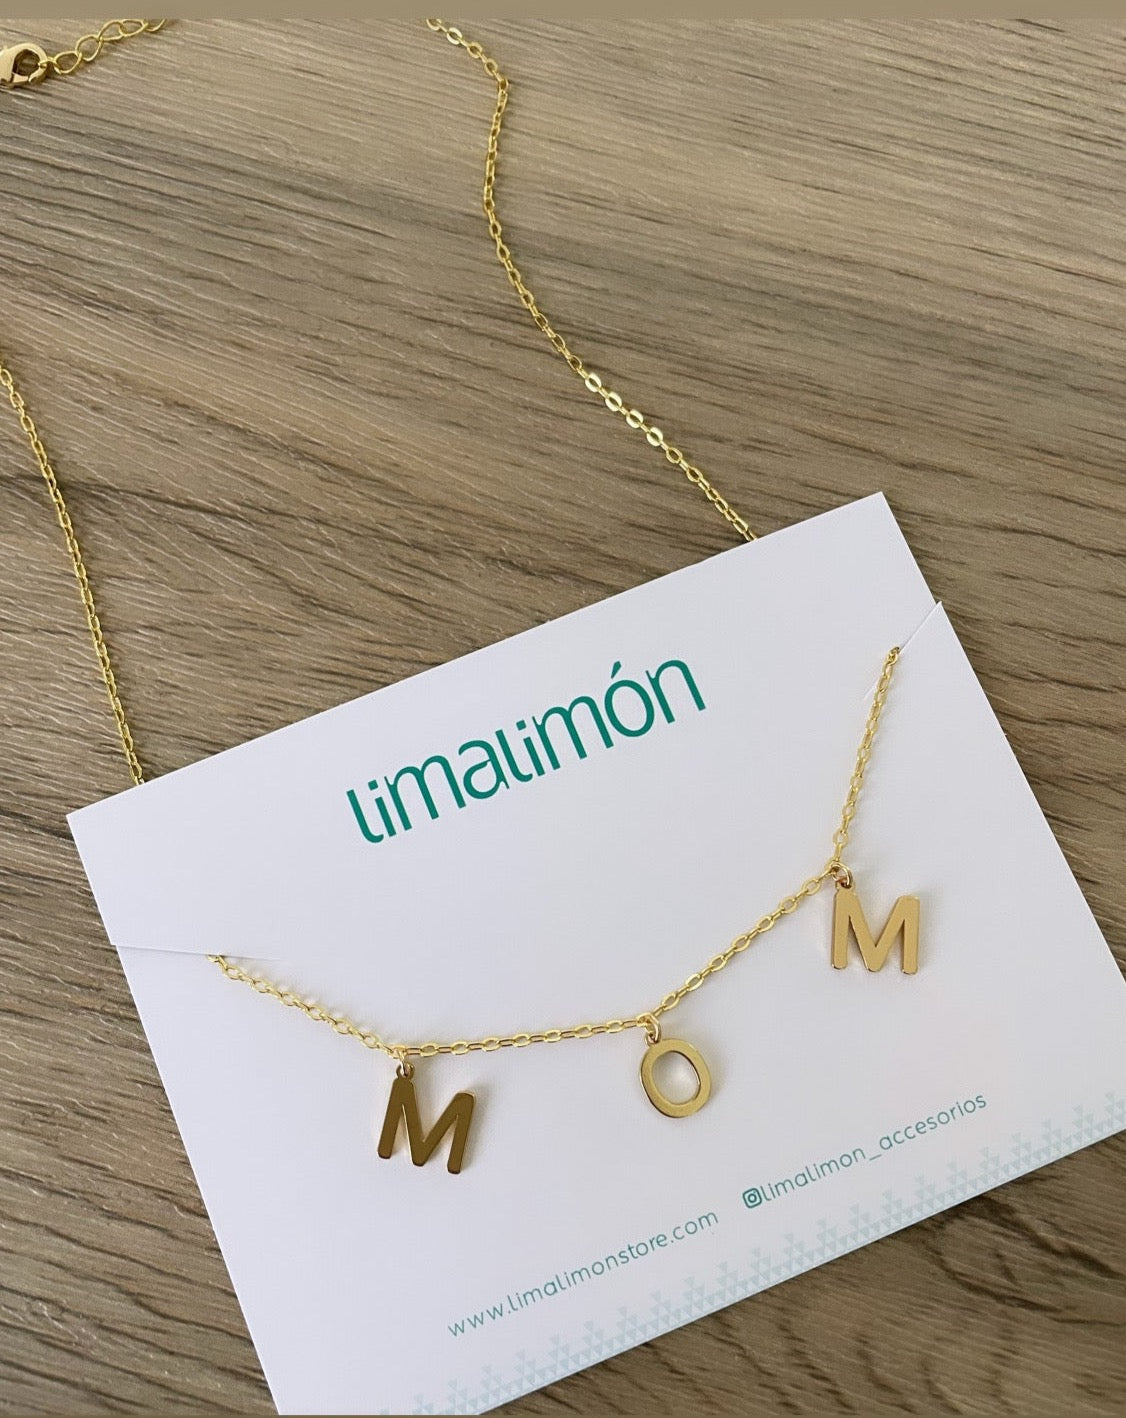 MOM Necklace - LimaLimón Store